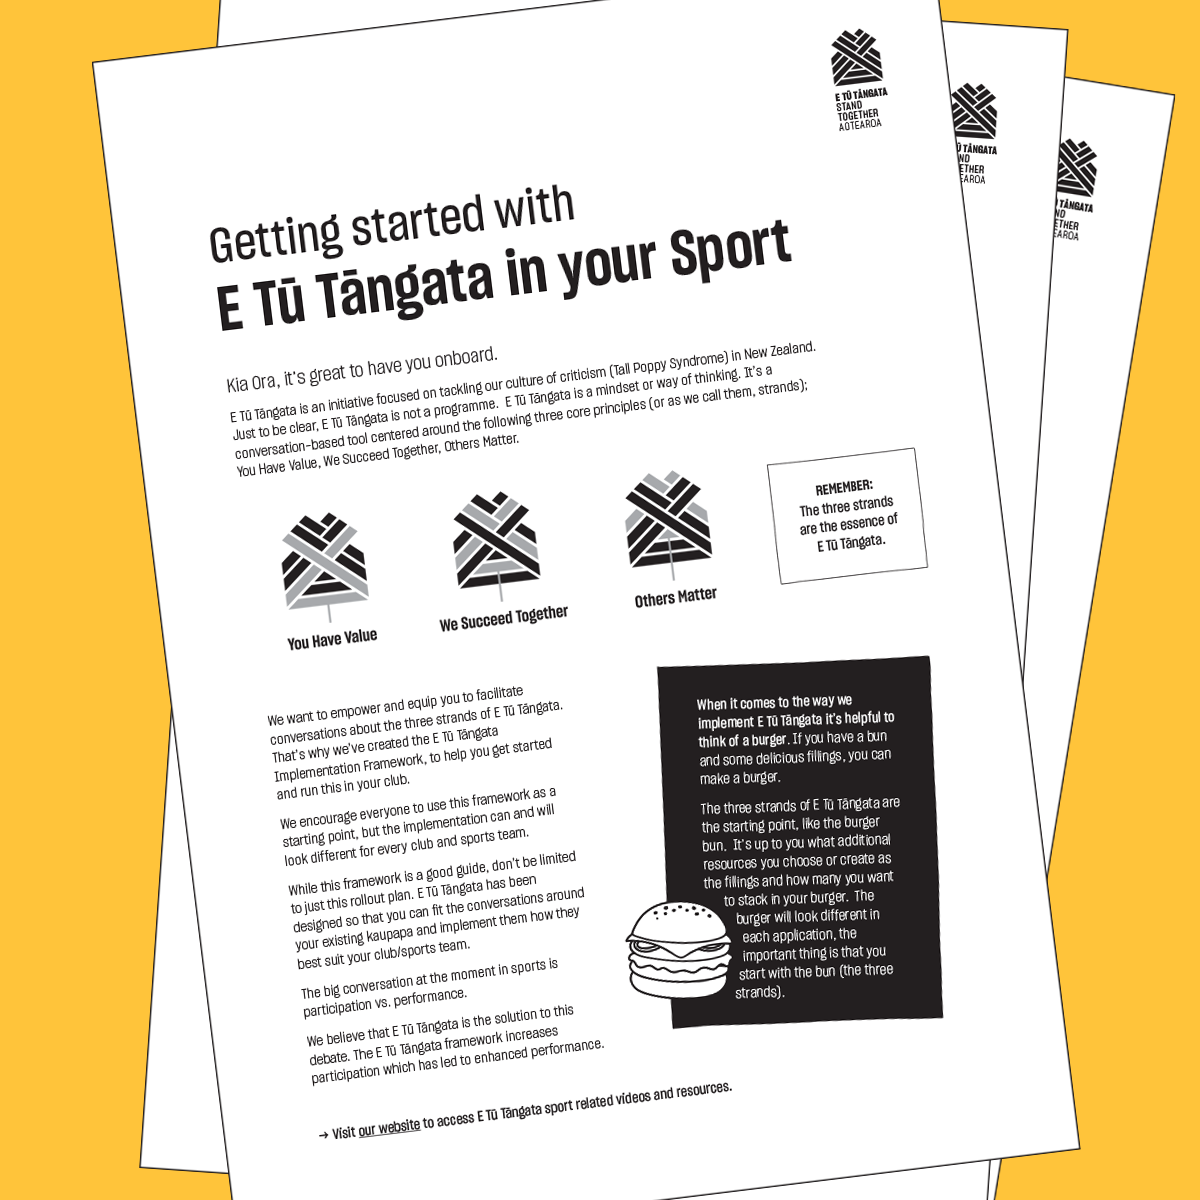 Getting Started with E Tū Tāngata in Sport